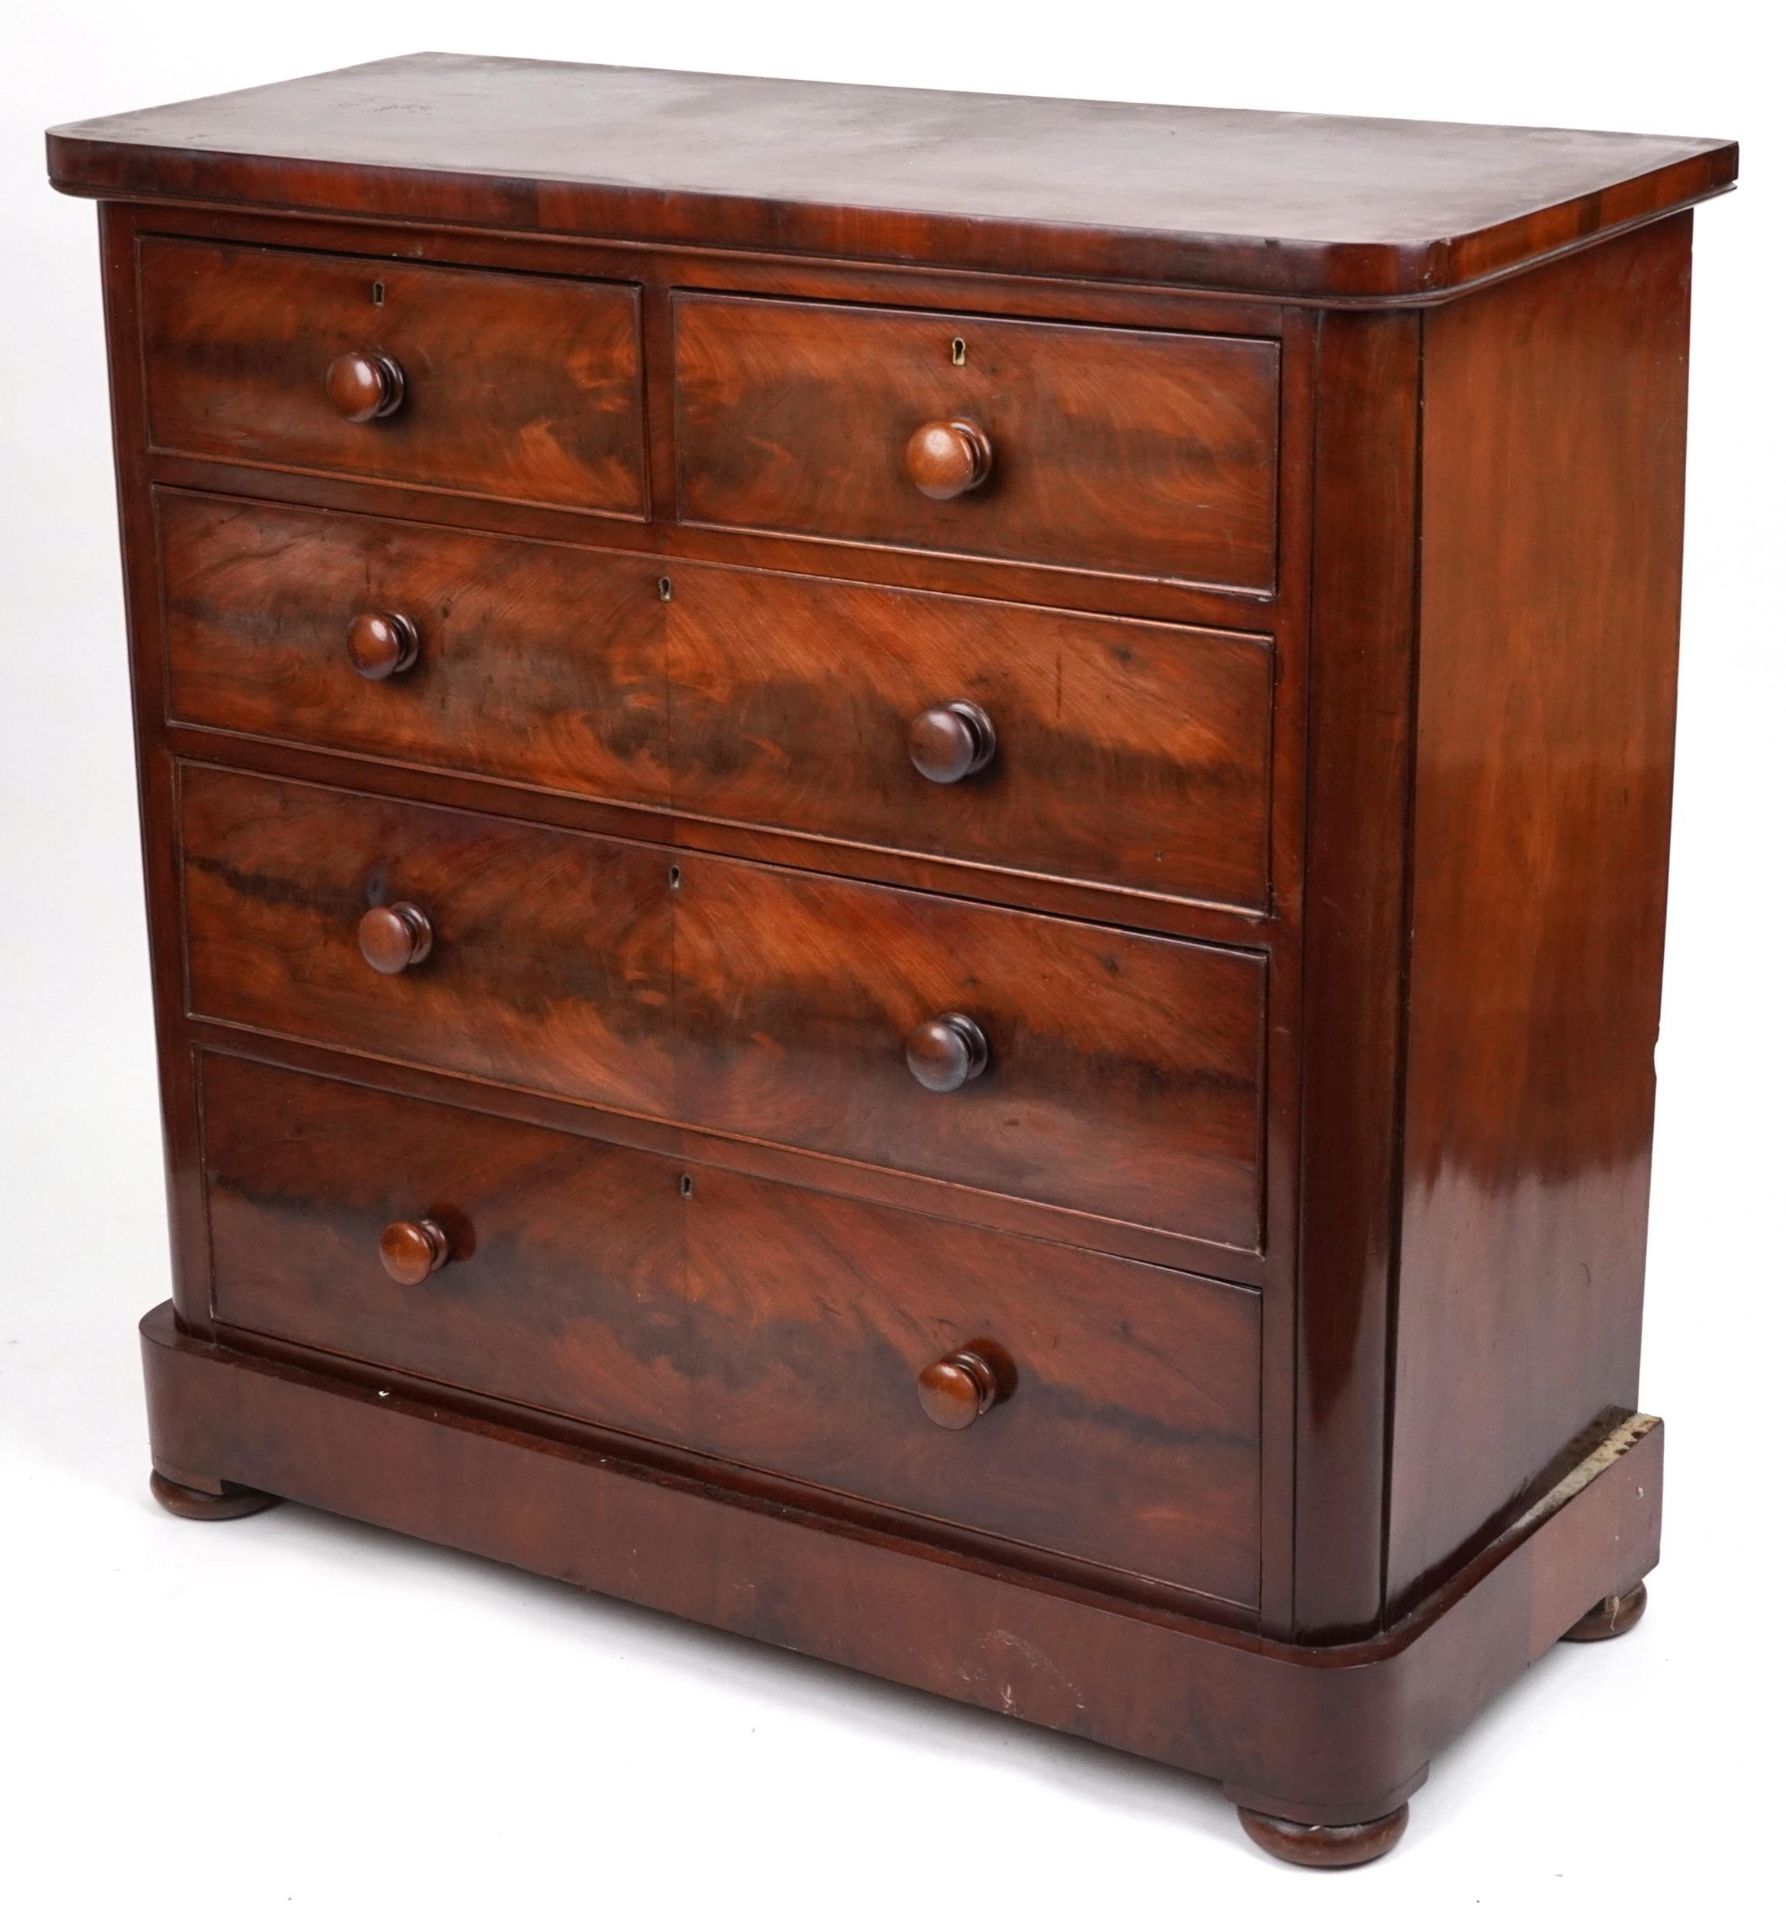 Victorian mahogany five drawer chest with turned wood handles, 117cm H x 121cm W x 51cm D : For